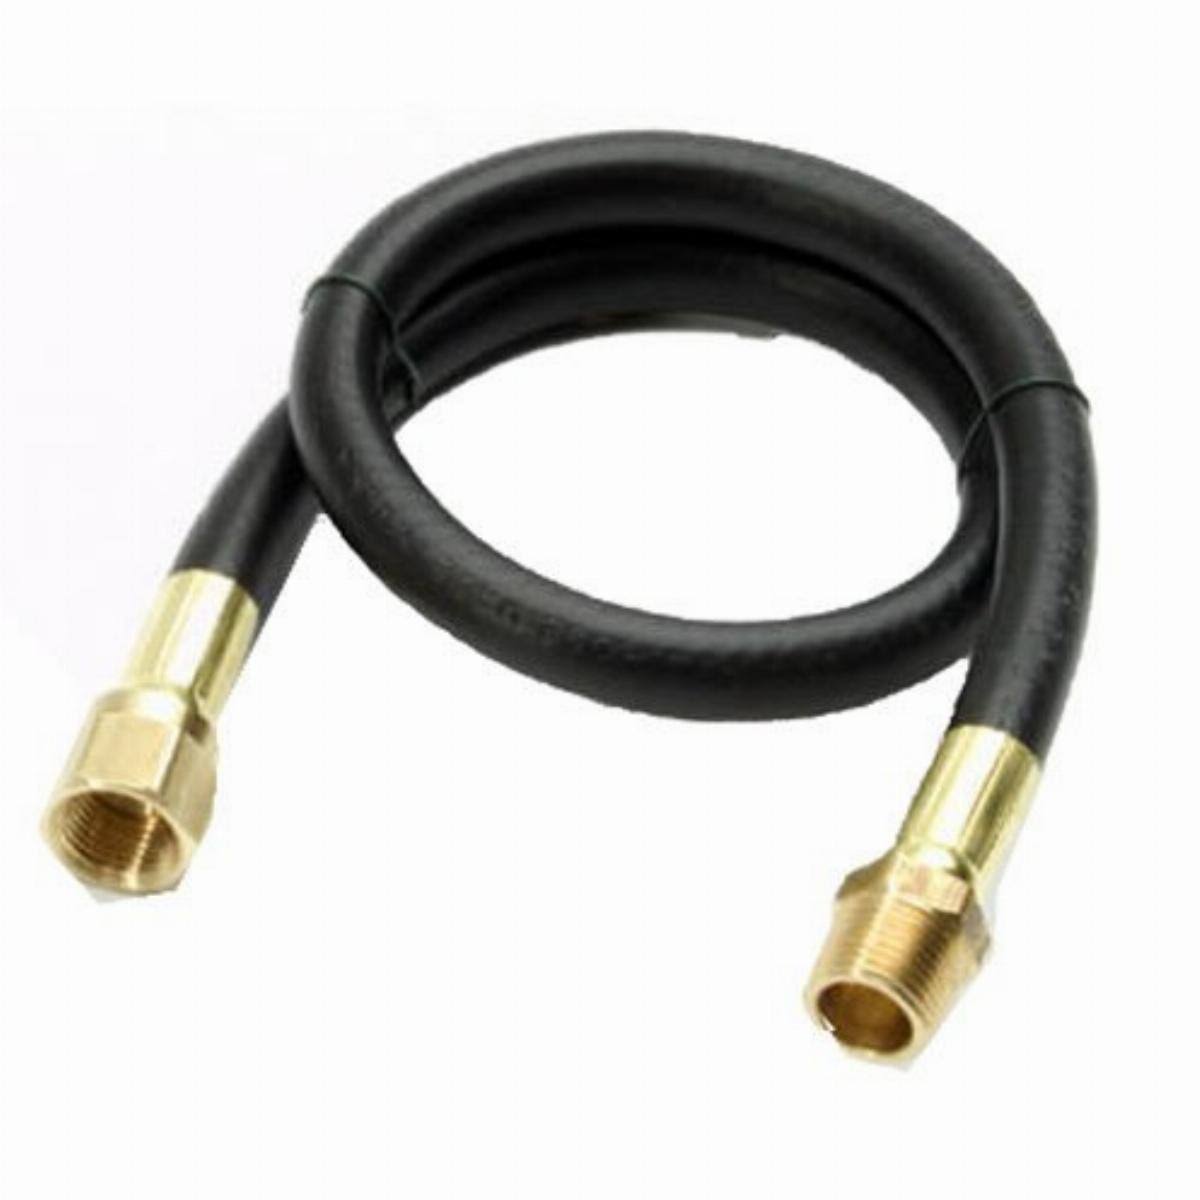 Mr. Heater Propane Gas Grill Replacement Hose - 22in